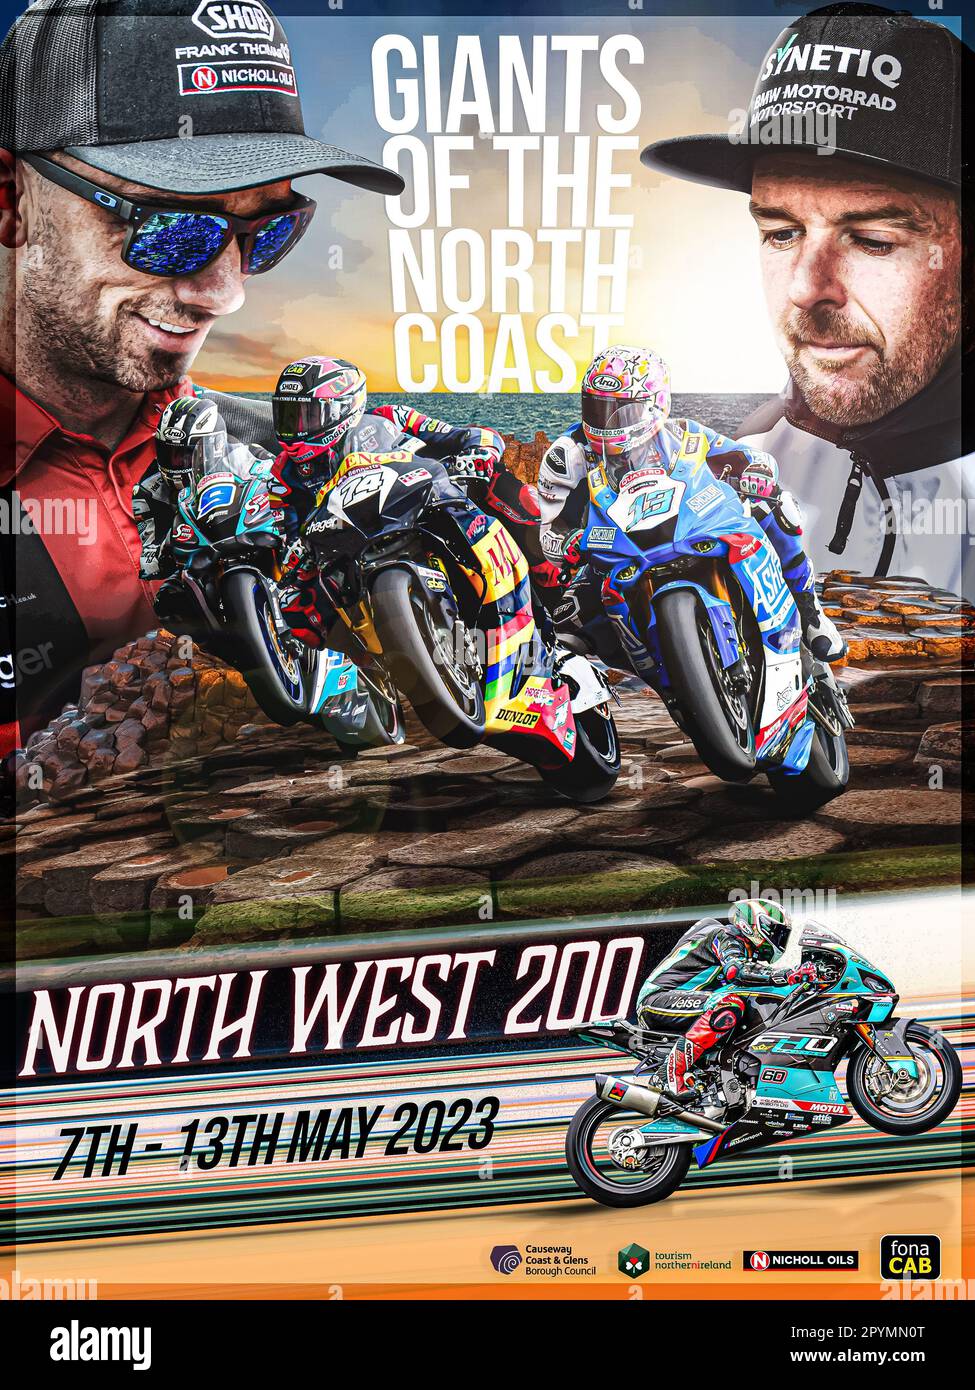 North West 200 2023 Race Poster Stock Photo